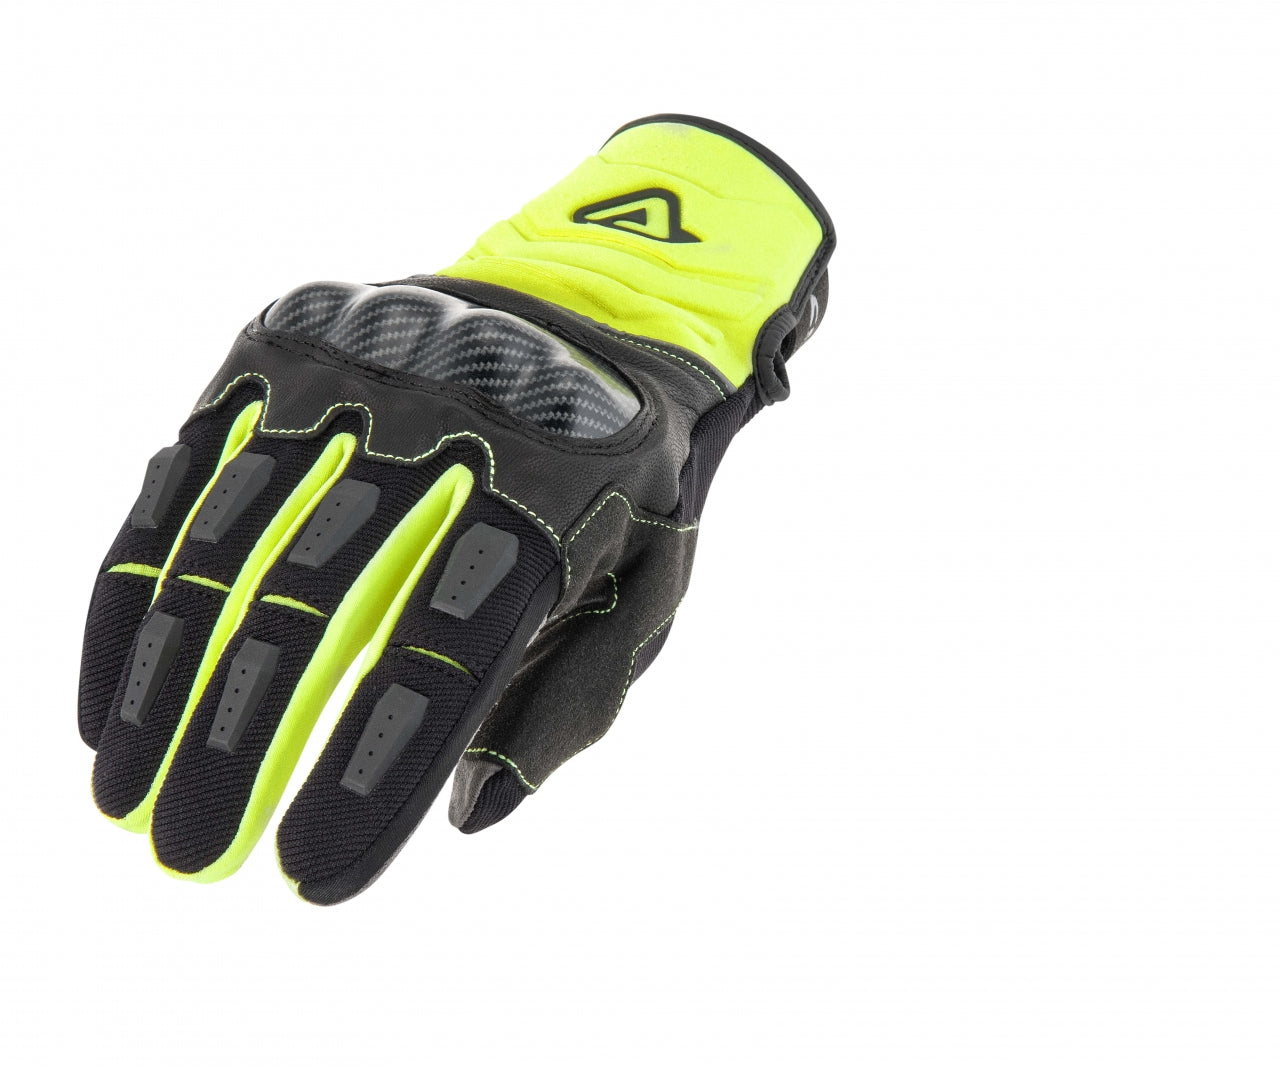 CE CARBON “G” 3.0 GLOVES YELLOW/BLACK